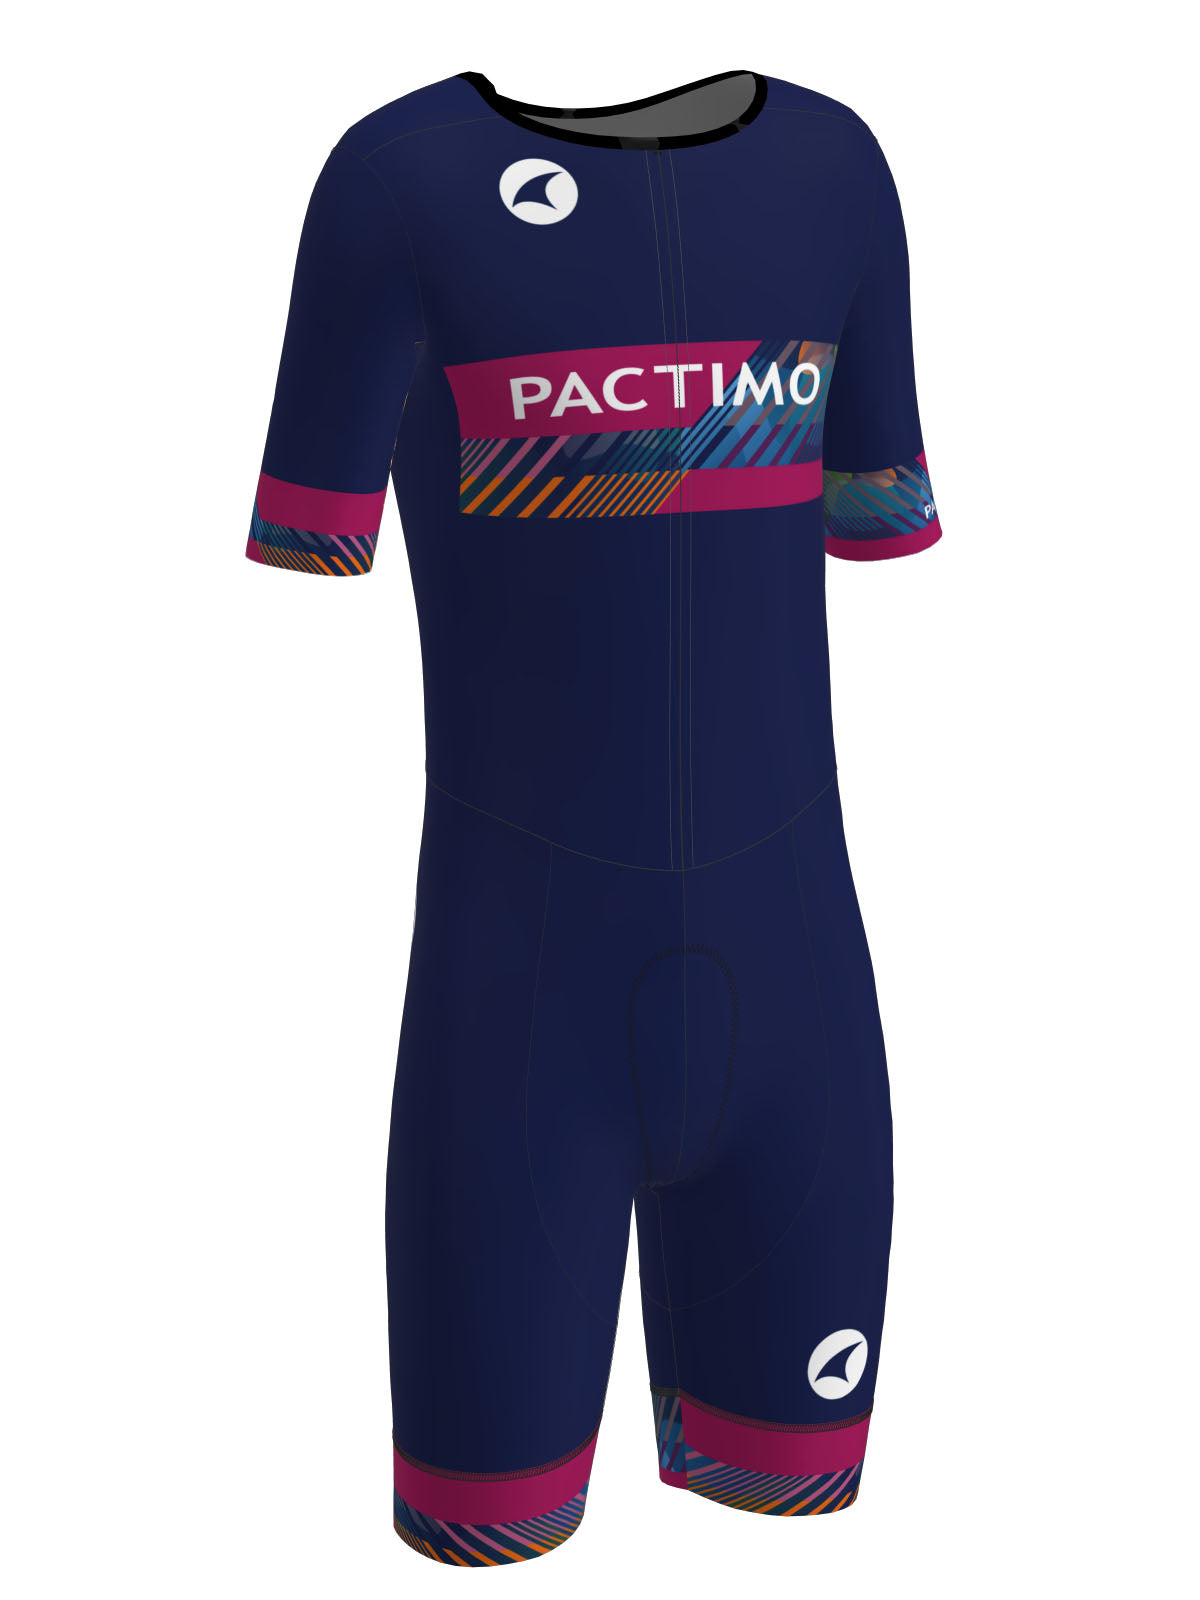 Men's Fully Printable Custom Cycling Skinsuit - Short Sleeve Front View #color-options_fully-printed